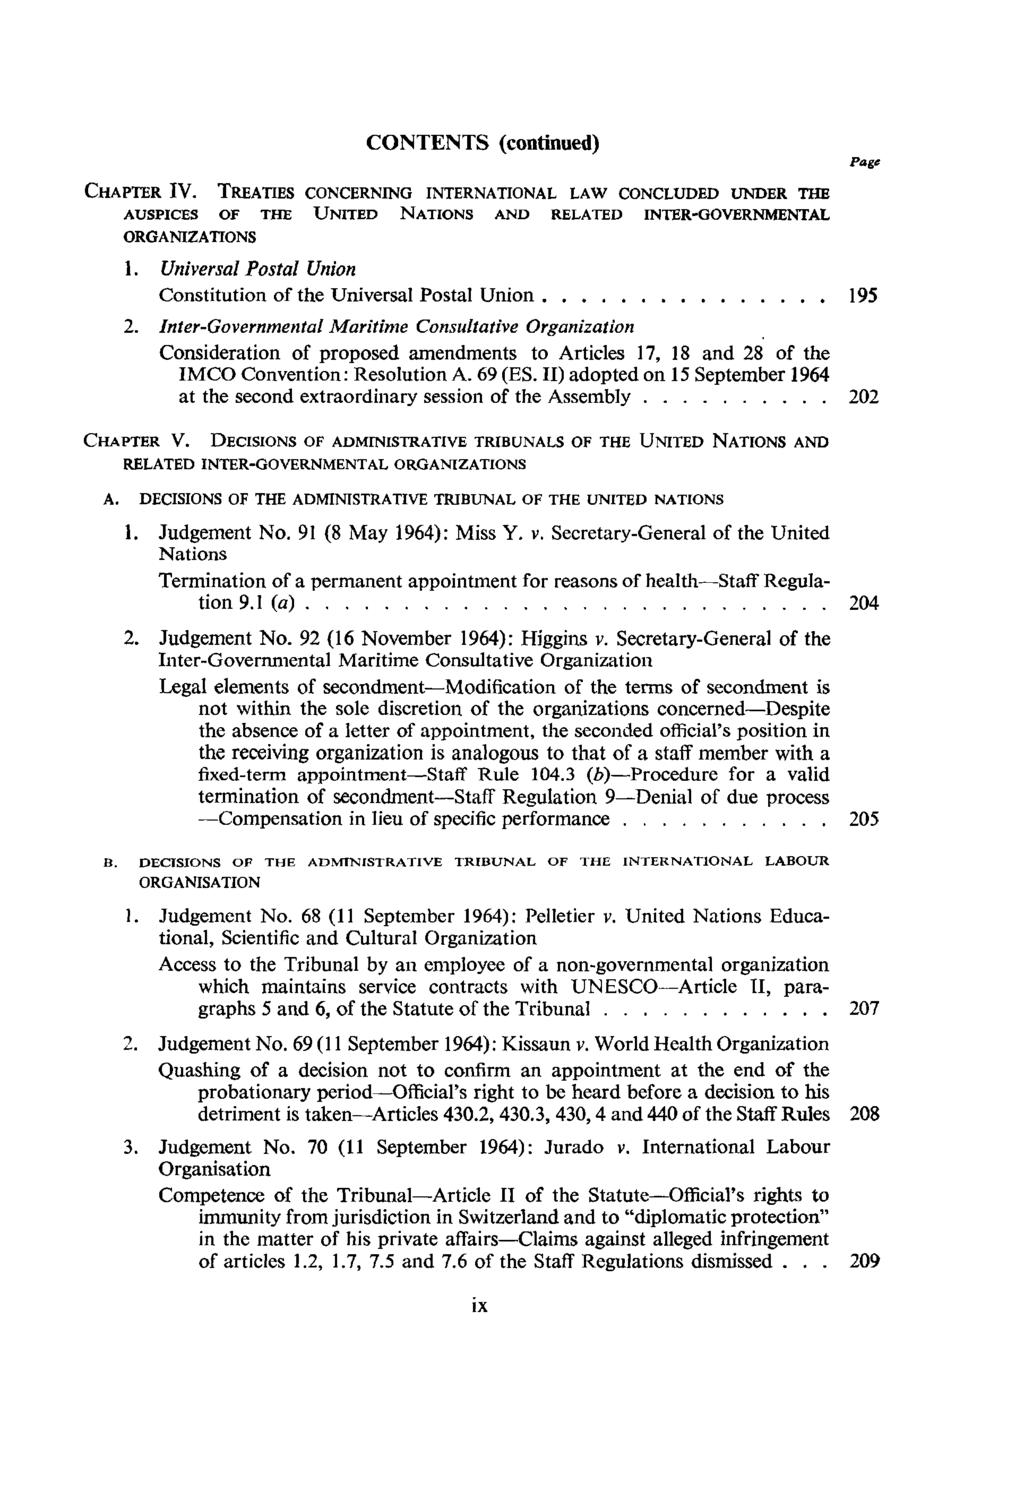 CHAPTER IV. CONTENTS (continued) TREATIES CONCERNING INTERNATIONAL LAW CONCLUDED UNDER THE AUSPICES OF THE UNITED NATIONS AND RELATED INTER-GOVERNMENTAL ORGANIZATIONS 1.